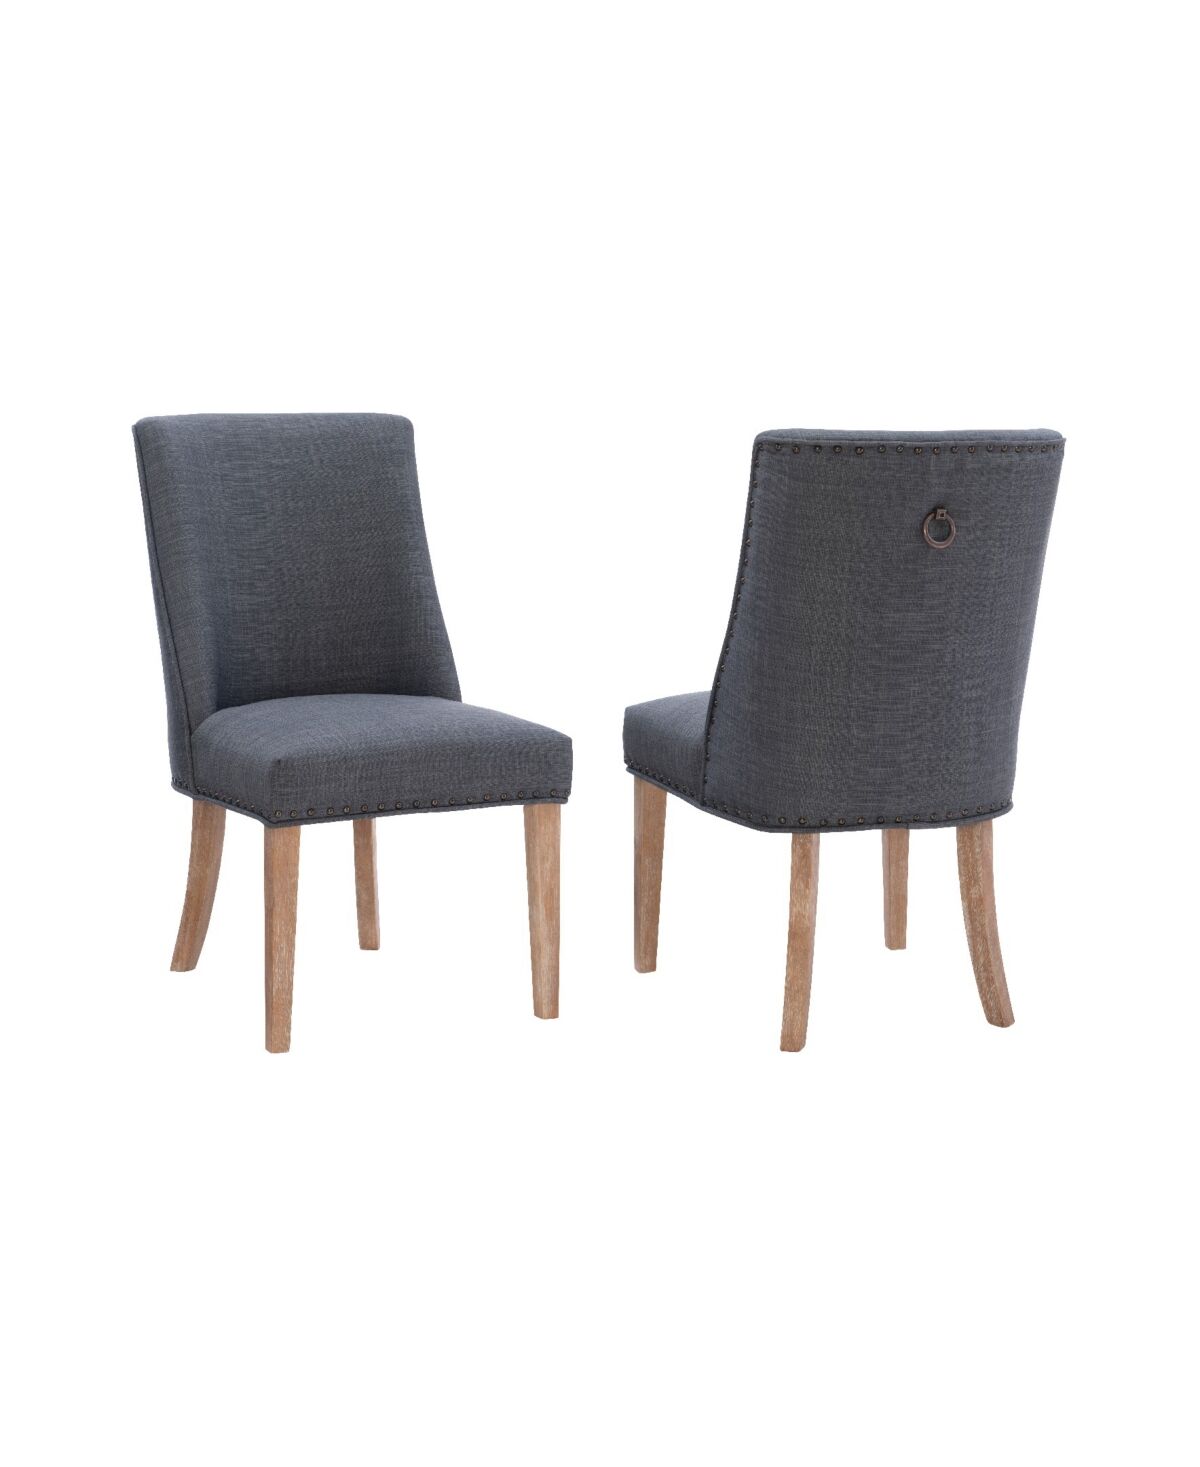 Linon Home Decor Powell Furniture Allard Upholstered Dining Chairs - Set of 2 - Natural, Gray